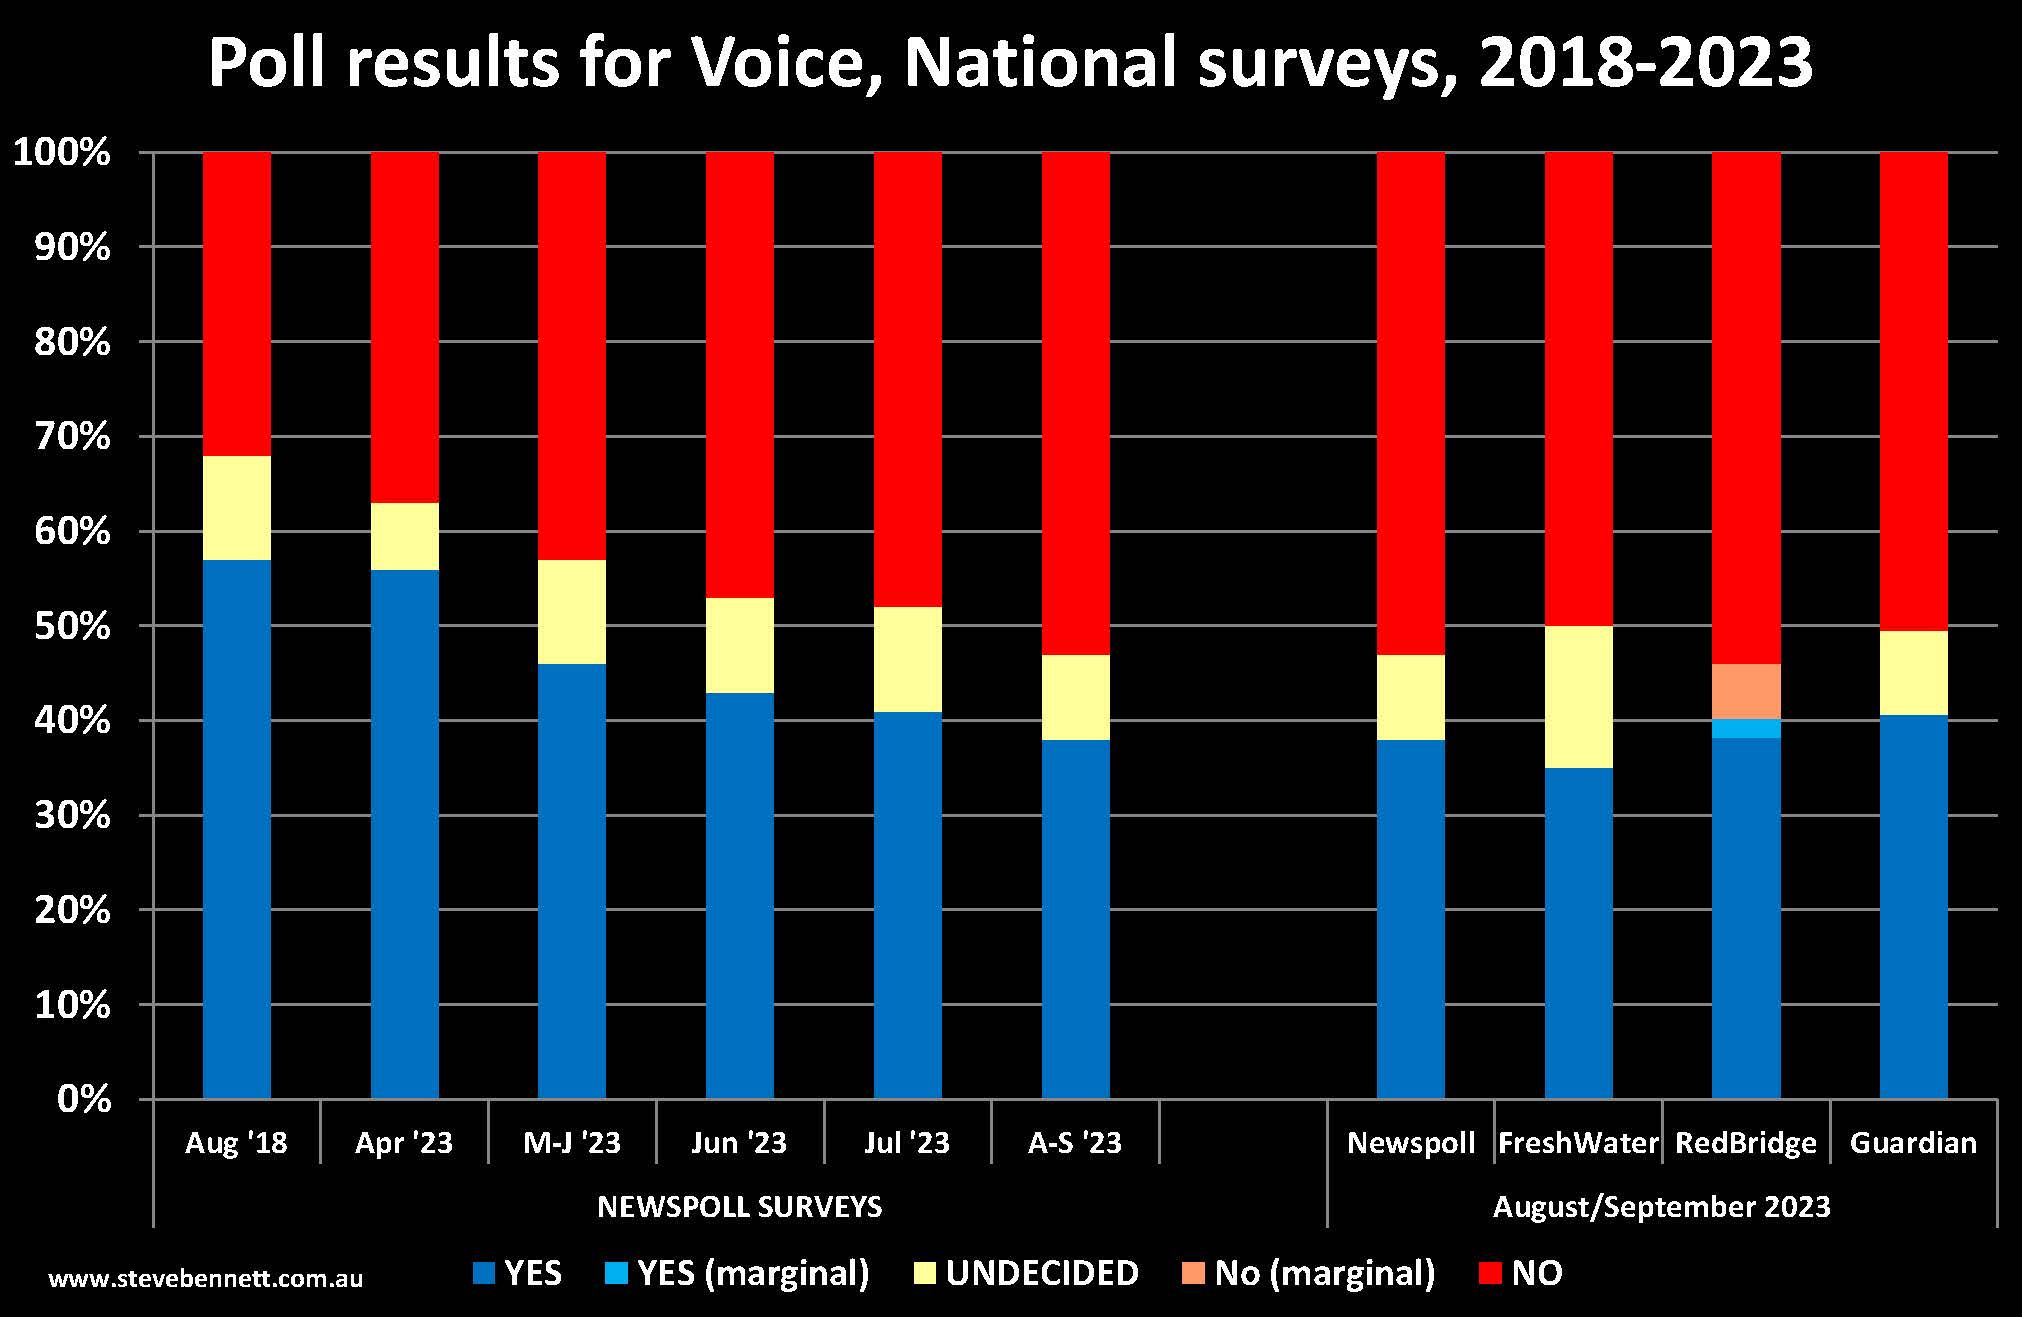 Poll results for Voice showing 'Yes' vote decreasing since April 2023